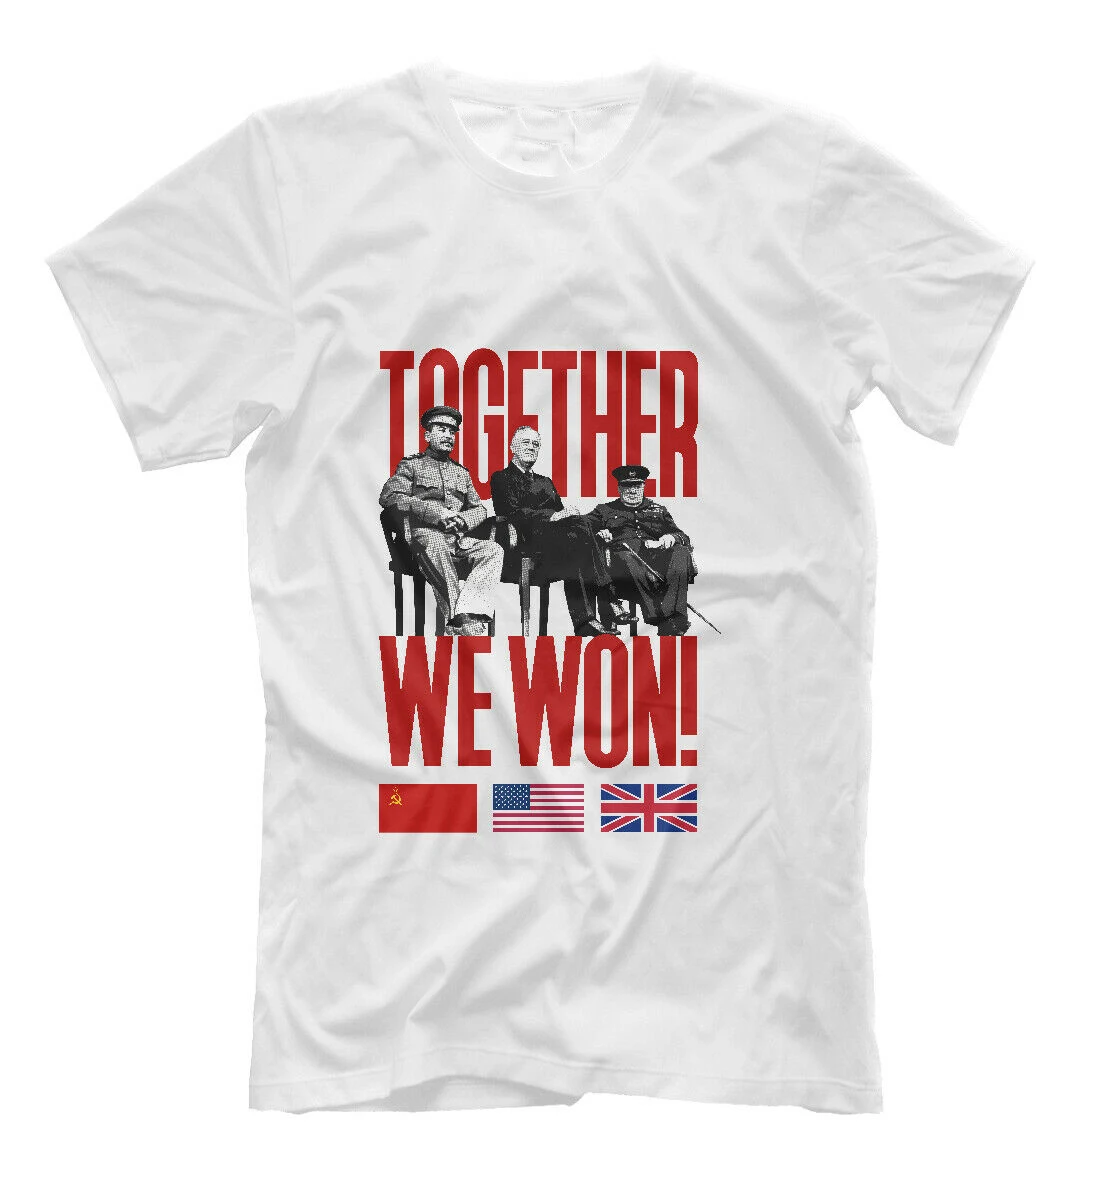 

Russia USA Great Britain WWII Together We Won! Victory Poster T-Shirt. Summer Cotton Short Sleeve O-Neck Mens T Shirt New S-3XL